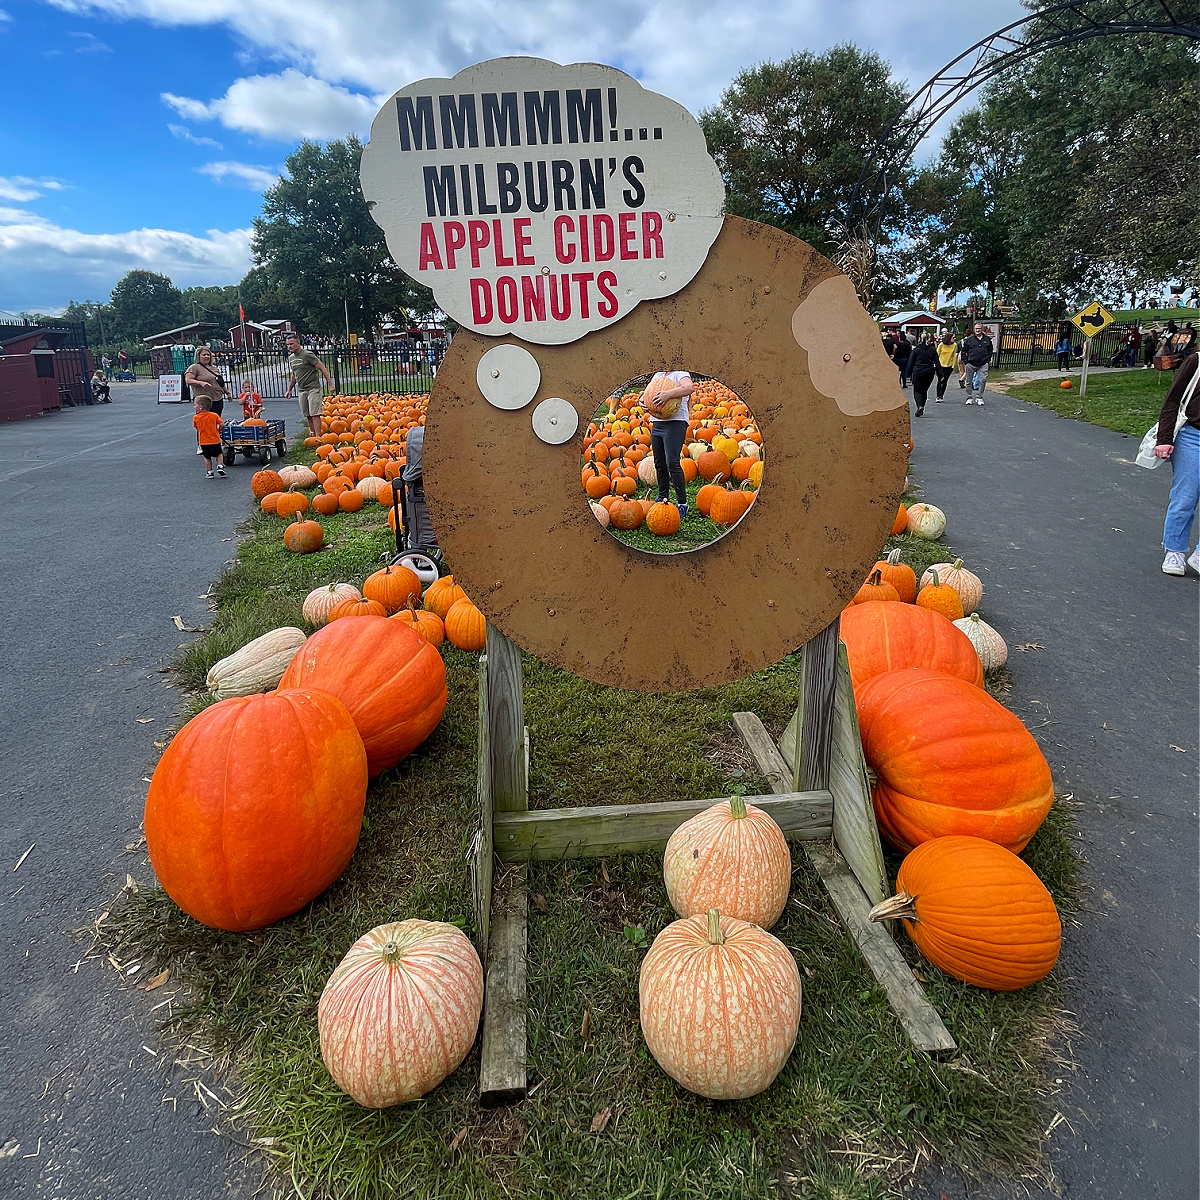 Milburn Orchards Fall Festival Weekends